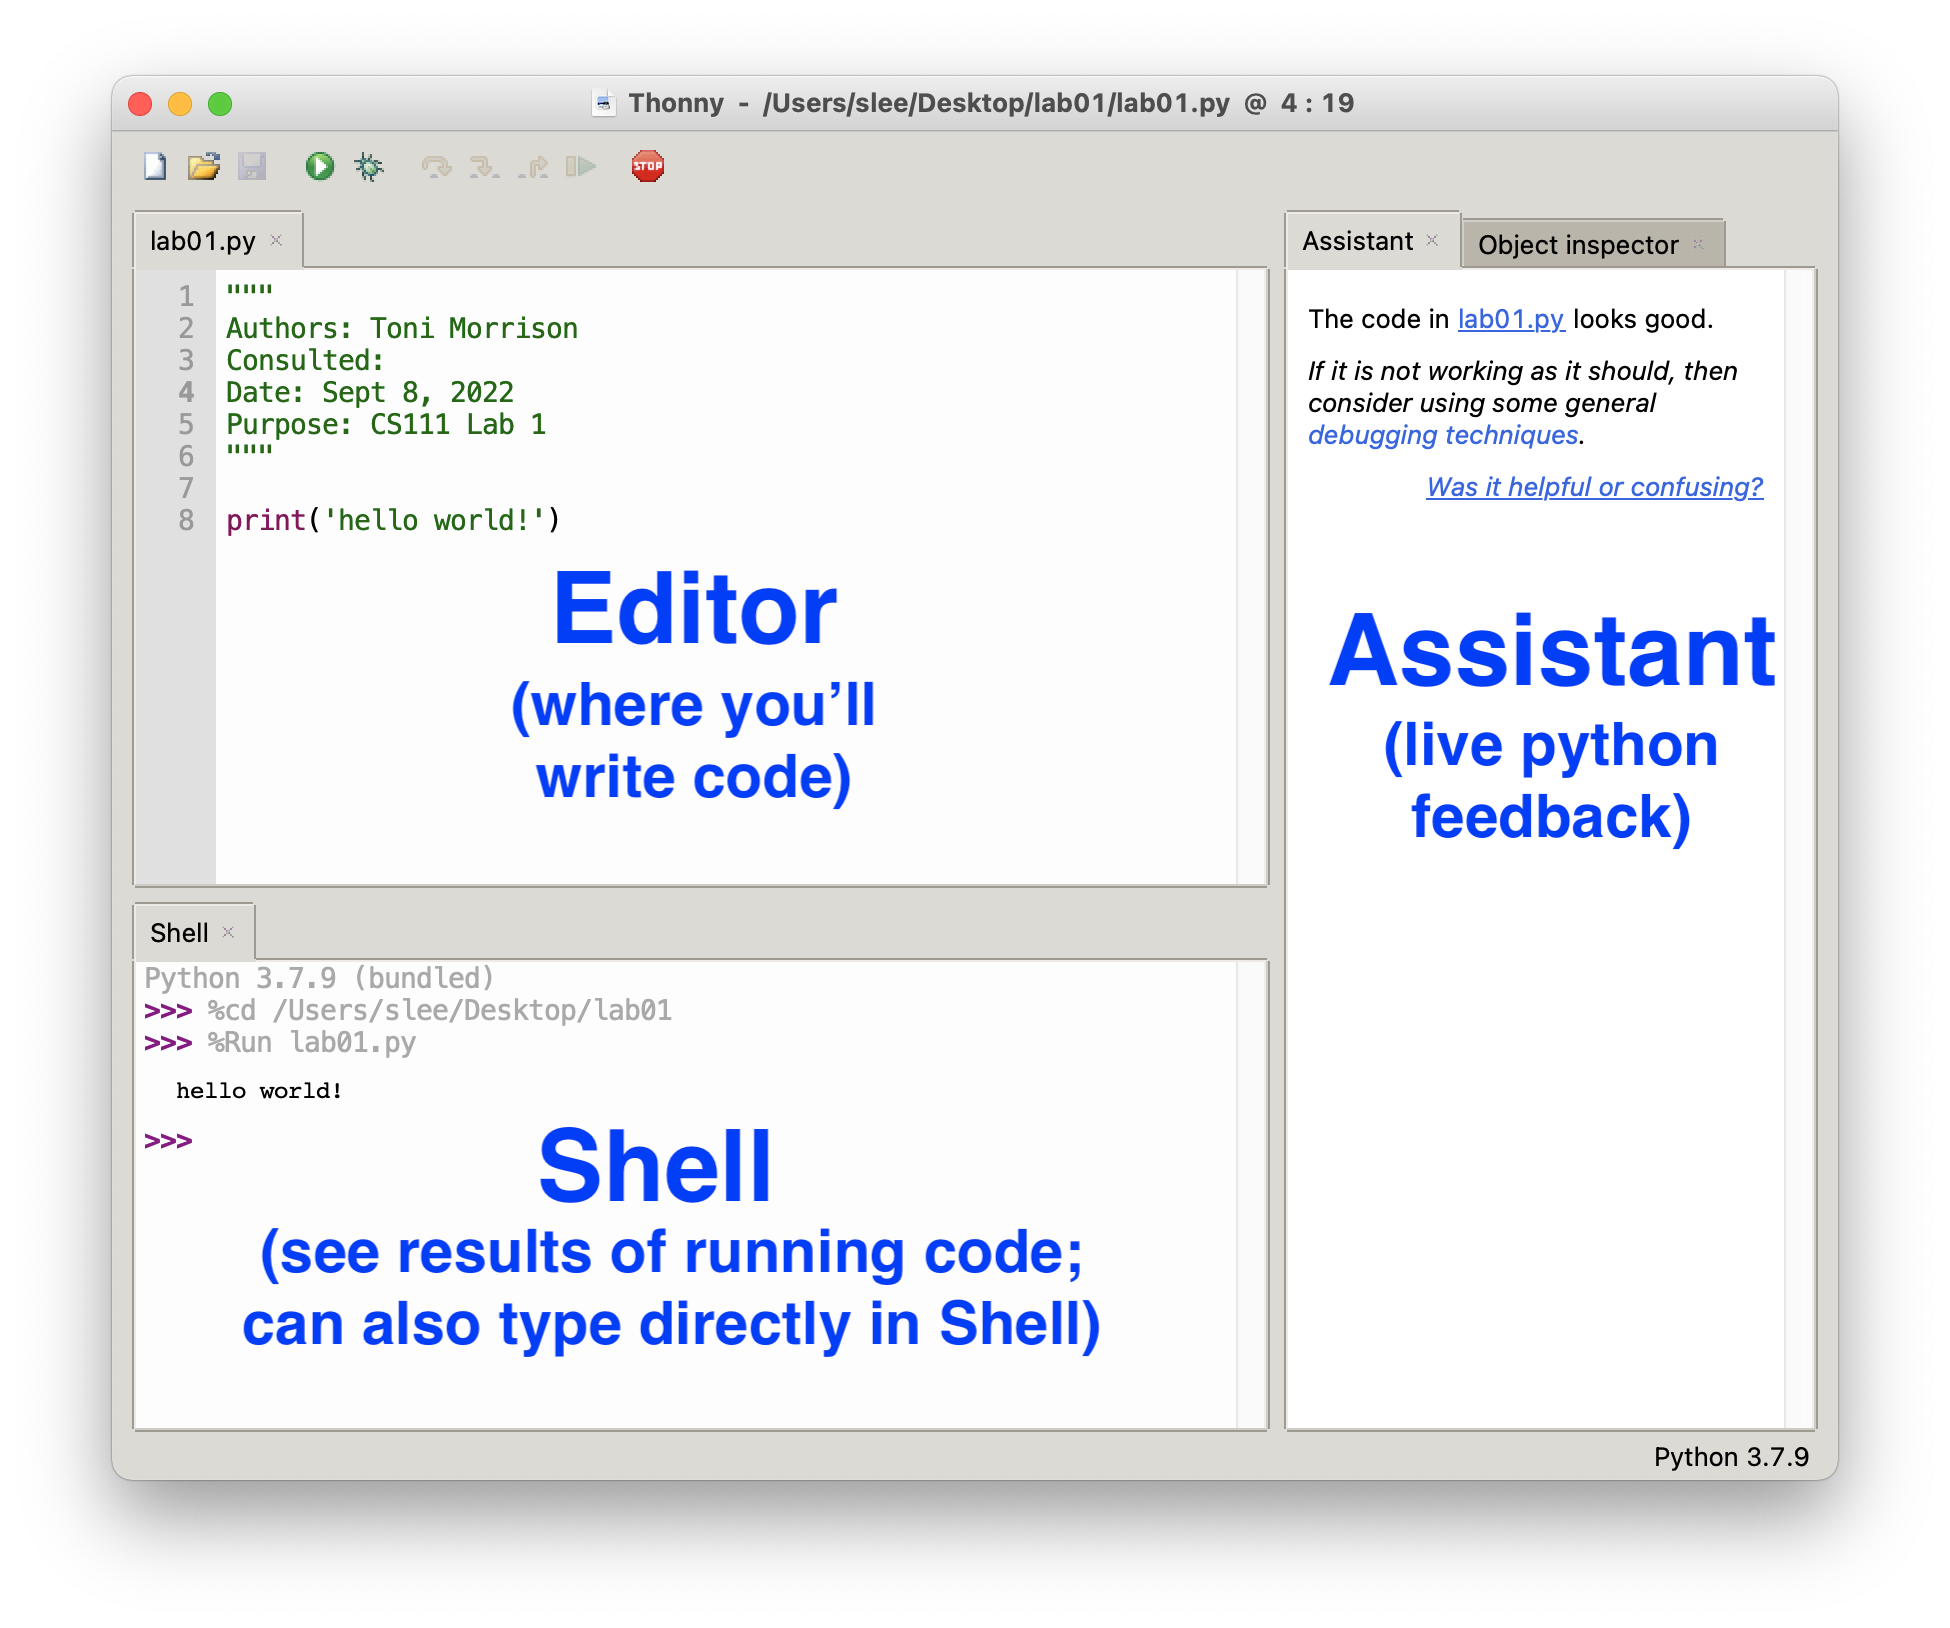 Screenshot summarizing the three main panels in Thonny: the Editor (where you will write your code), the Shell (see the results of running code; can also type directly in Shell), and the Assistant (live python feedback).